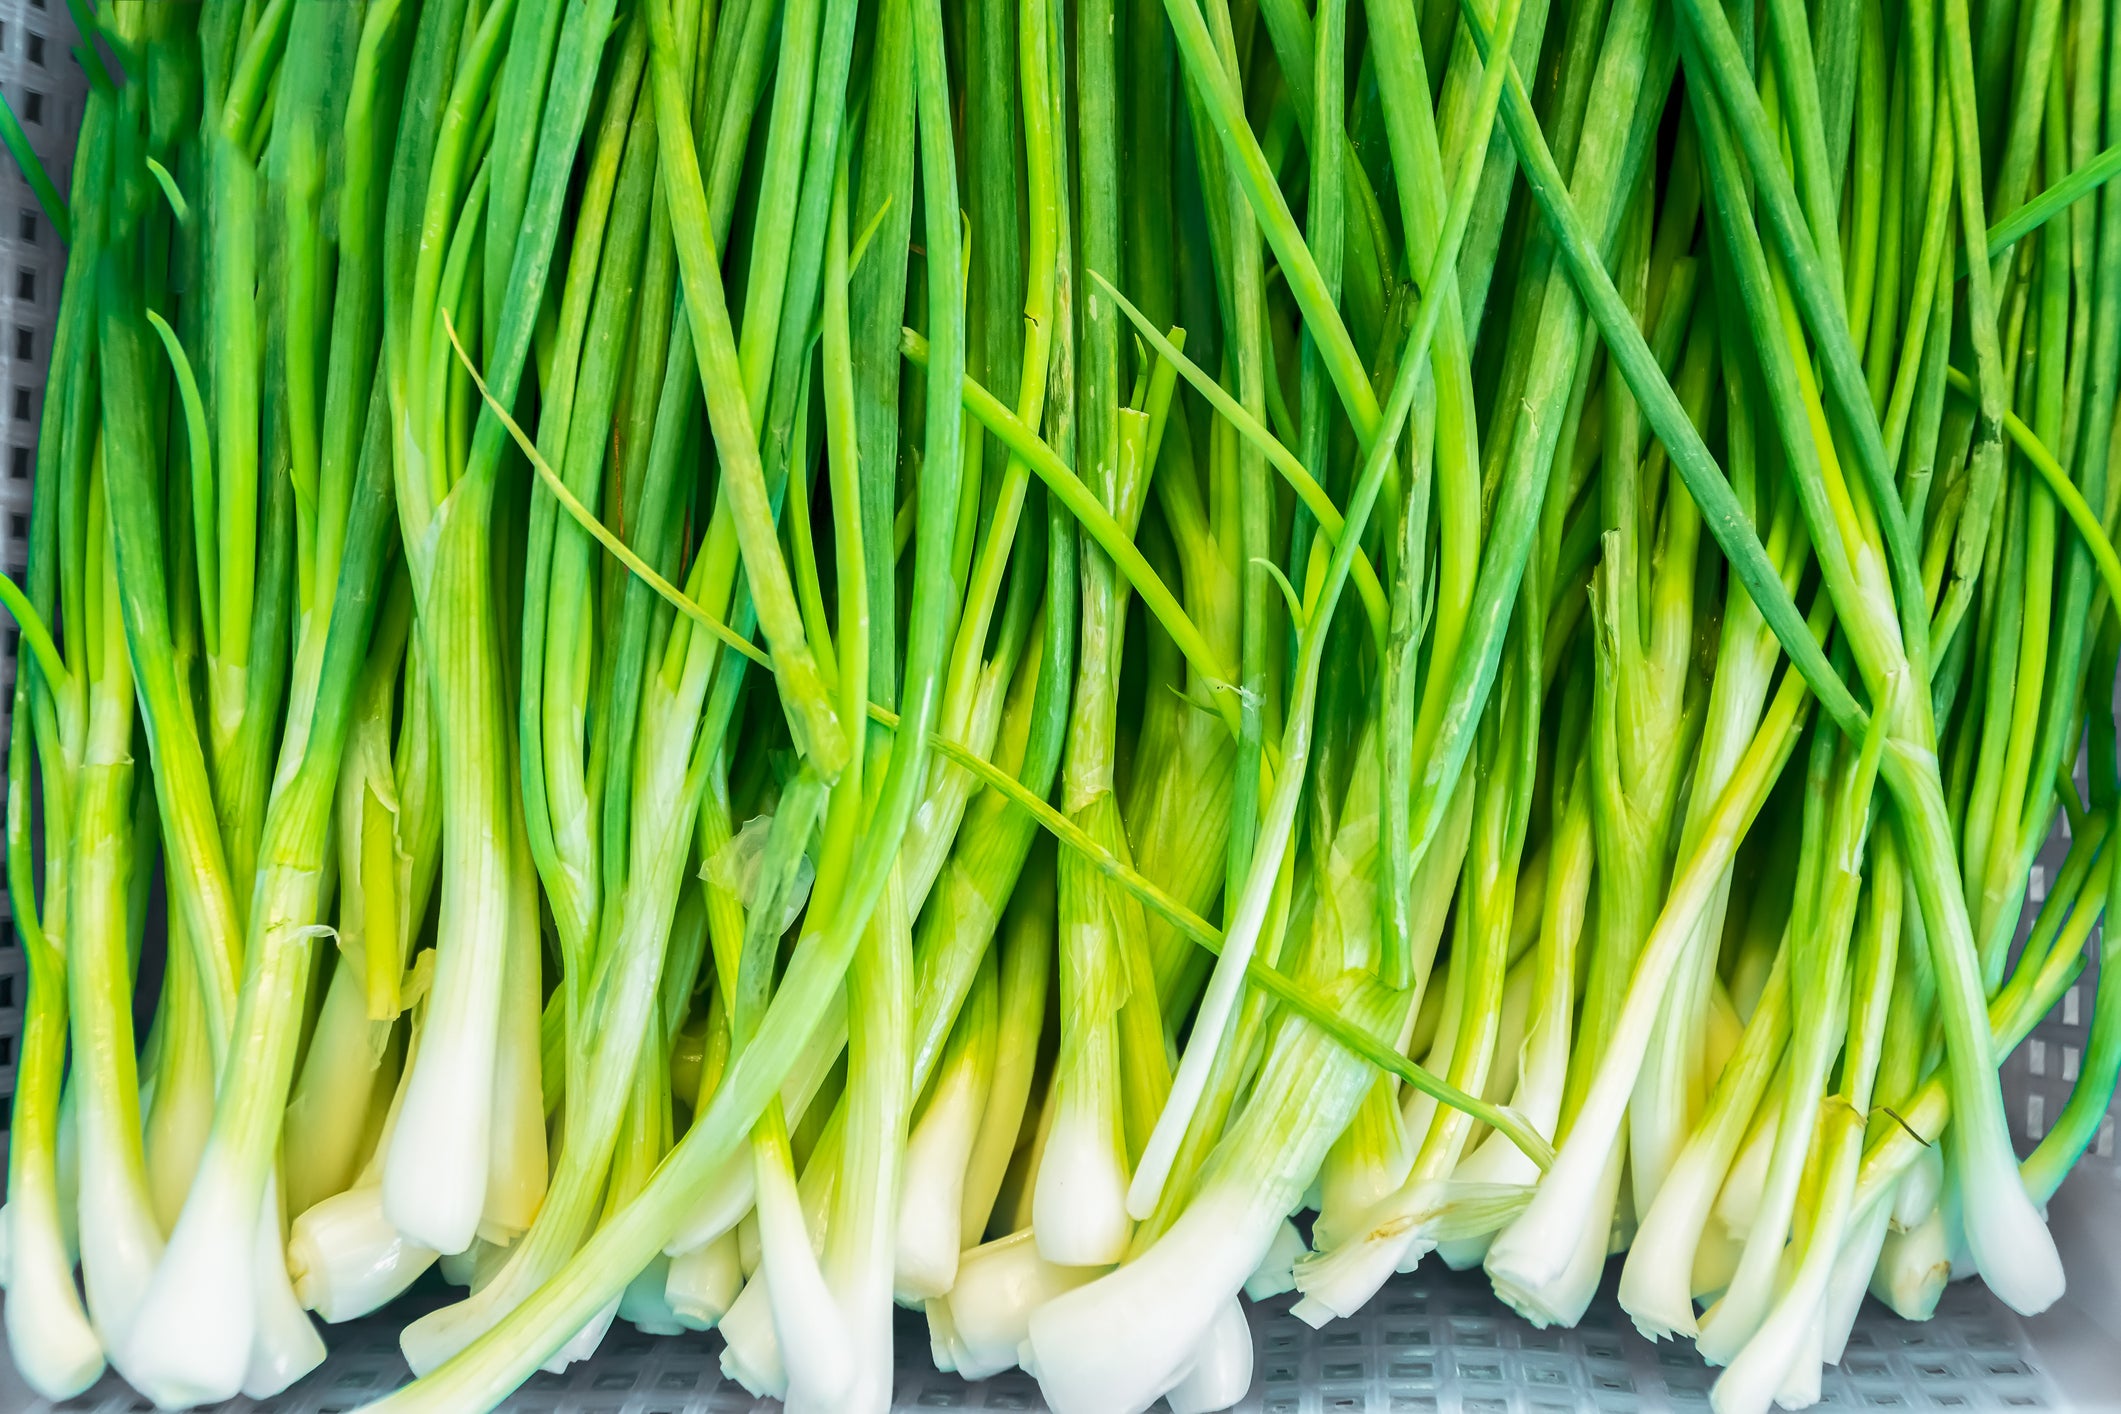 Spring onions are at their peak from March to June